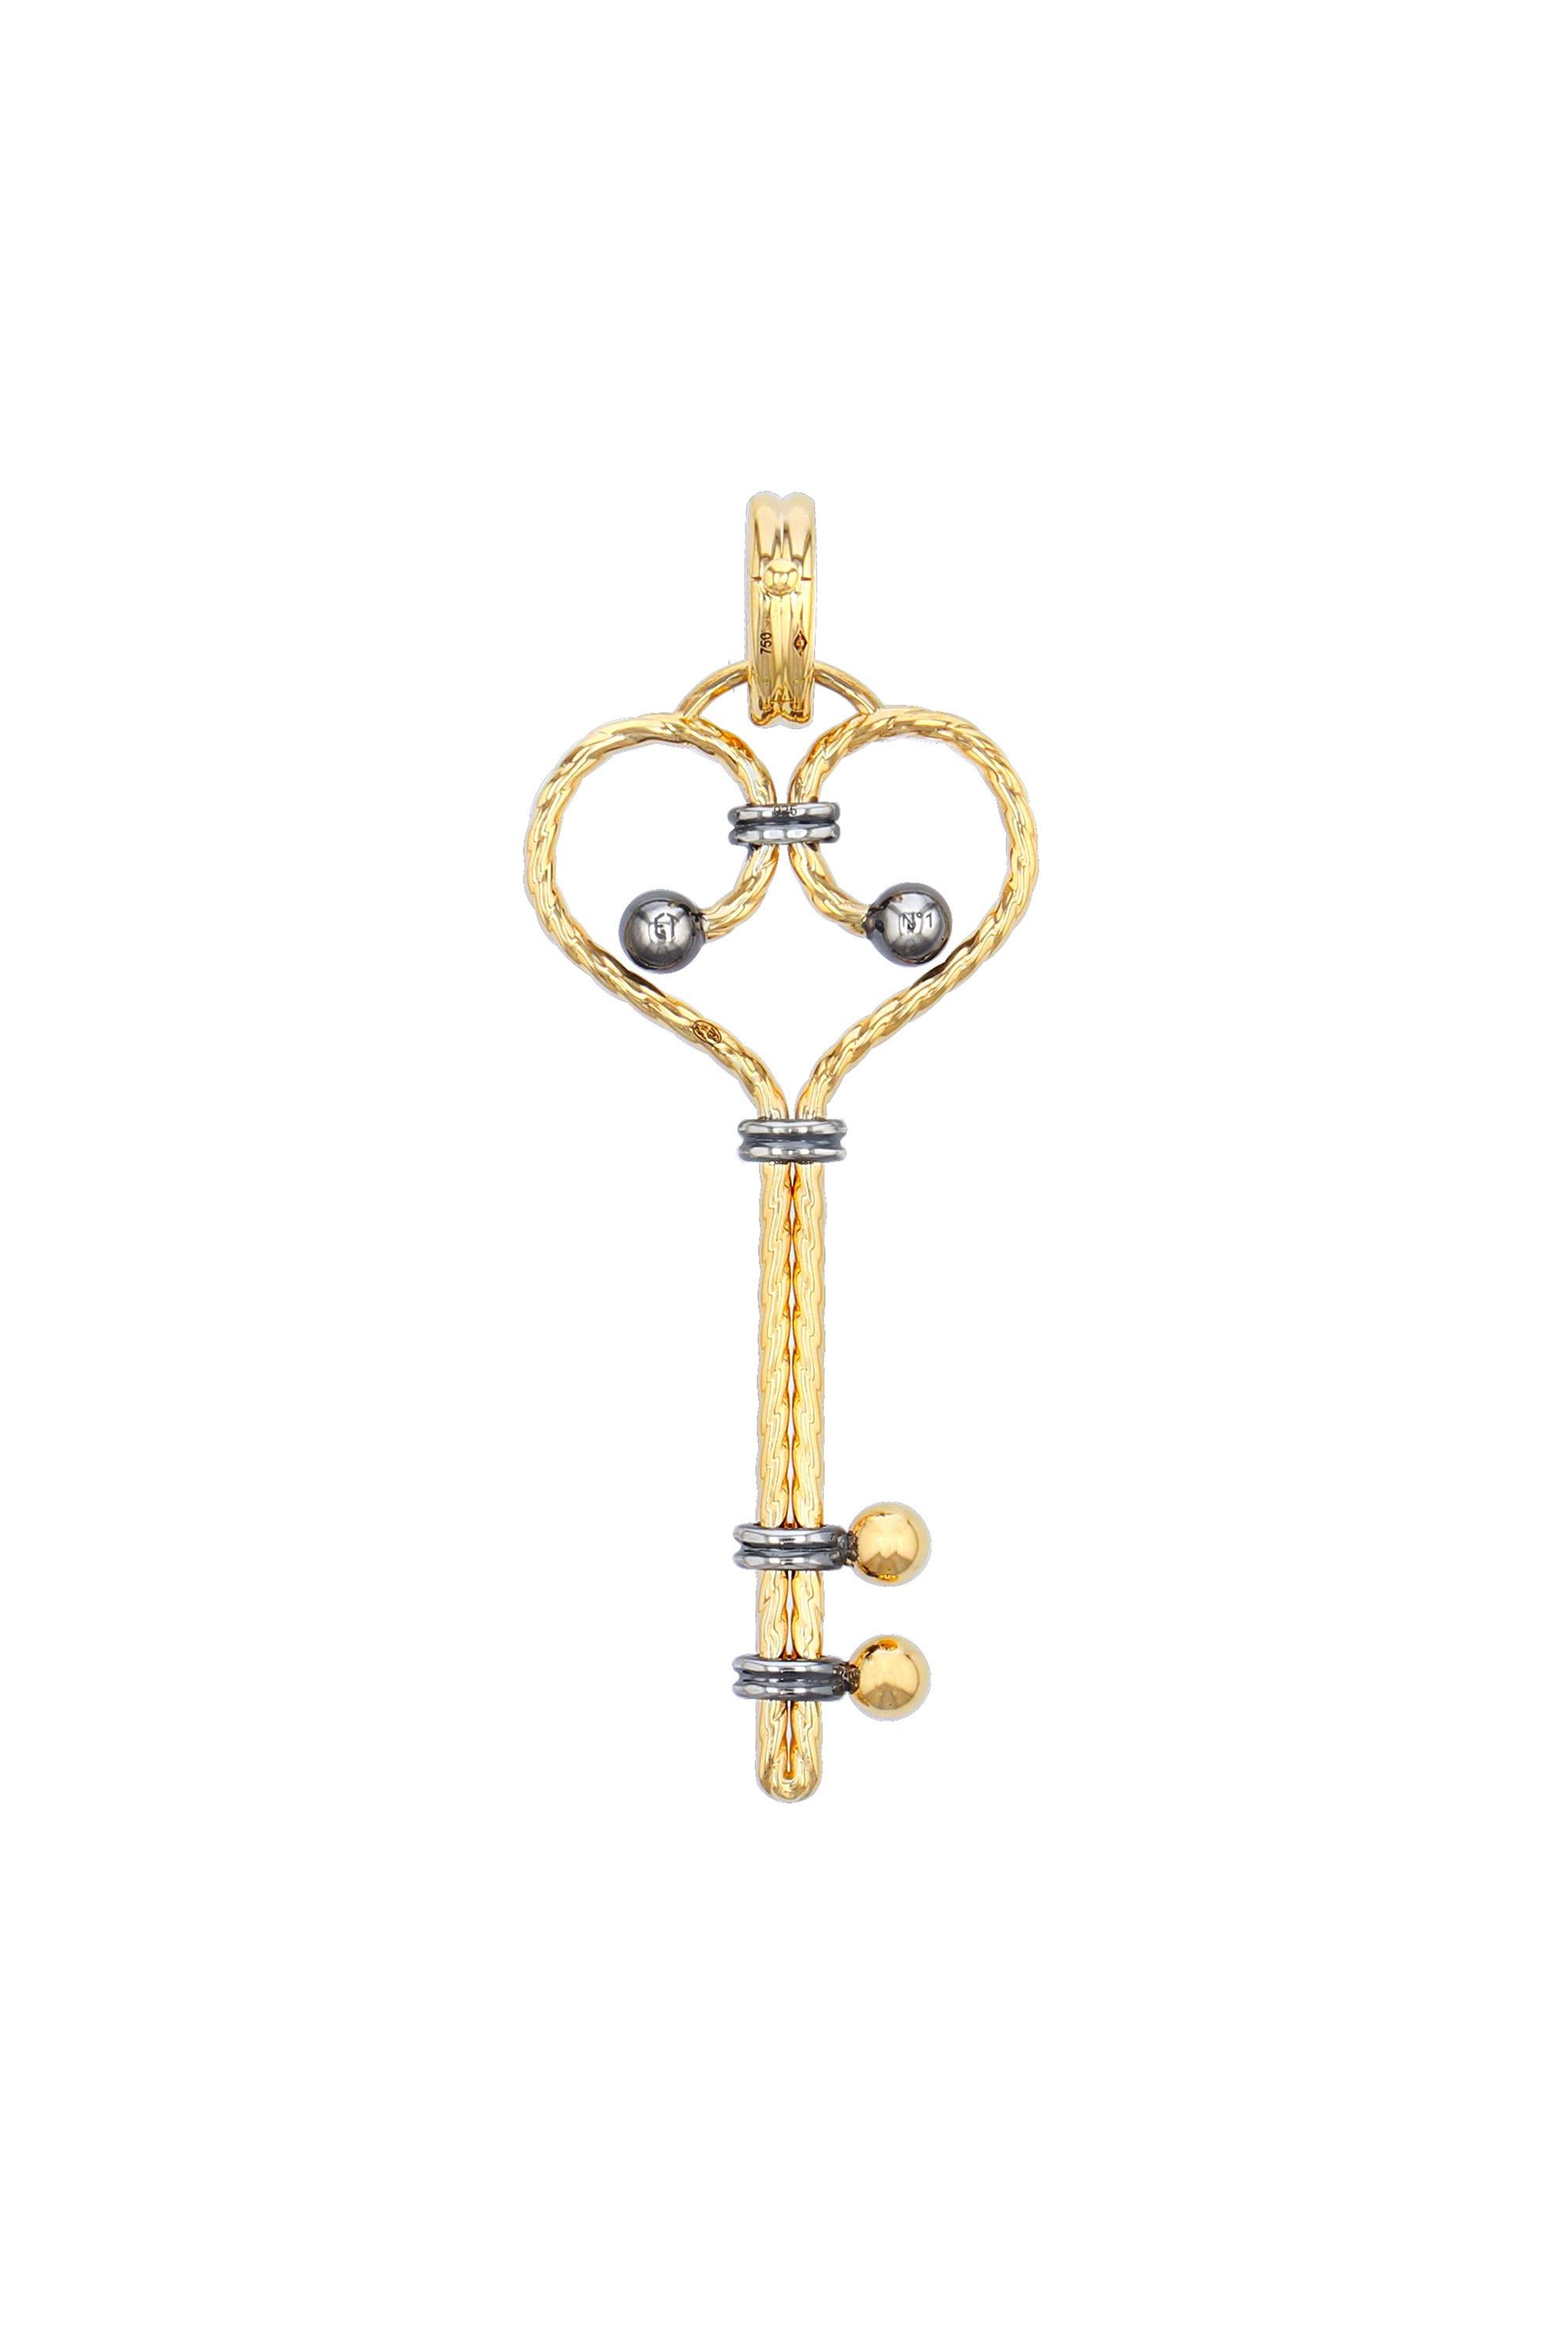 Diamond & Gold Clef Twist Charm by Elie Top In New Condition For Sale In Paris, France